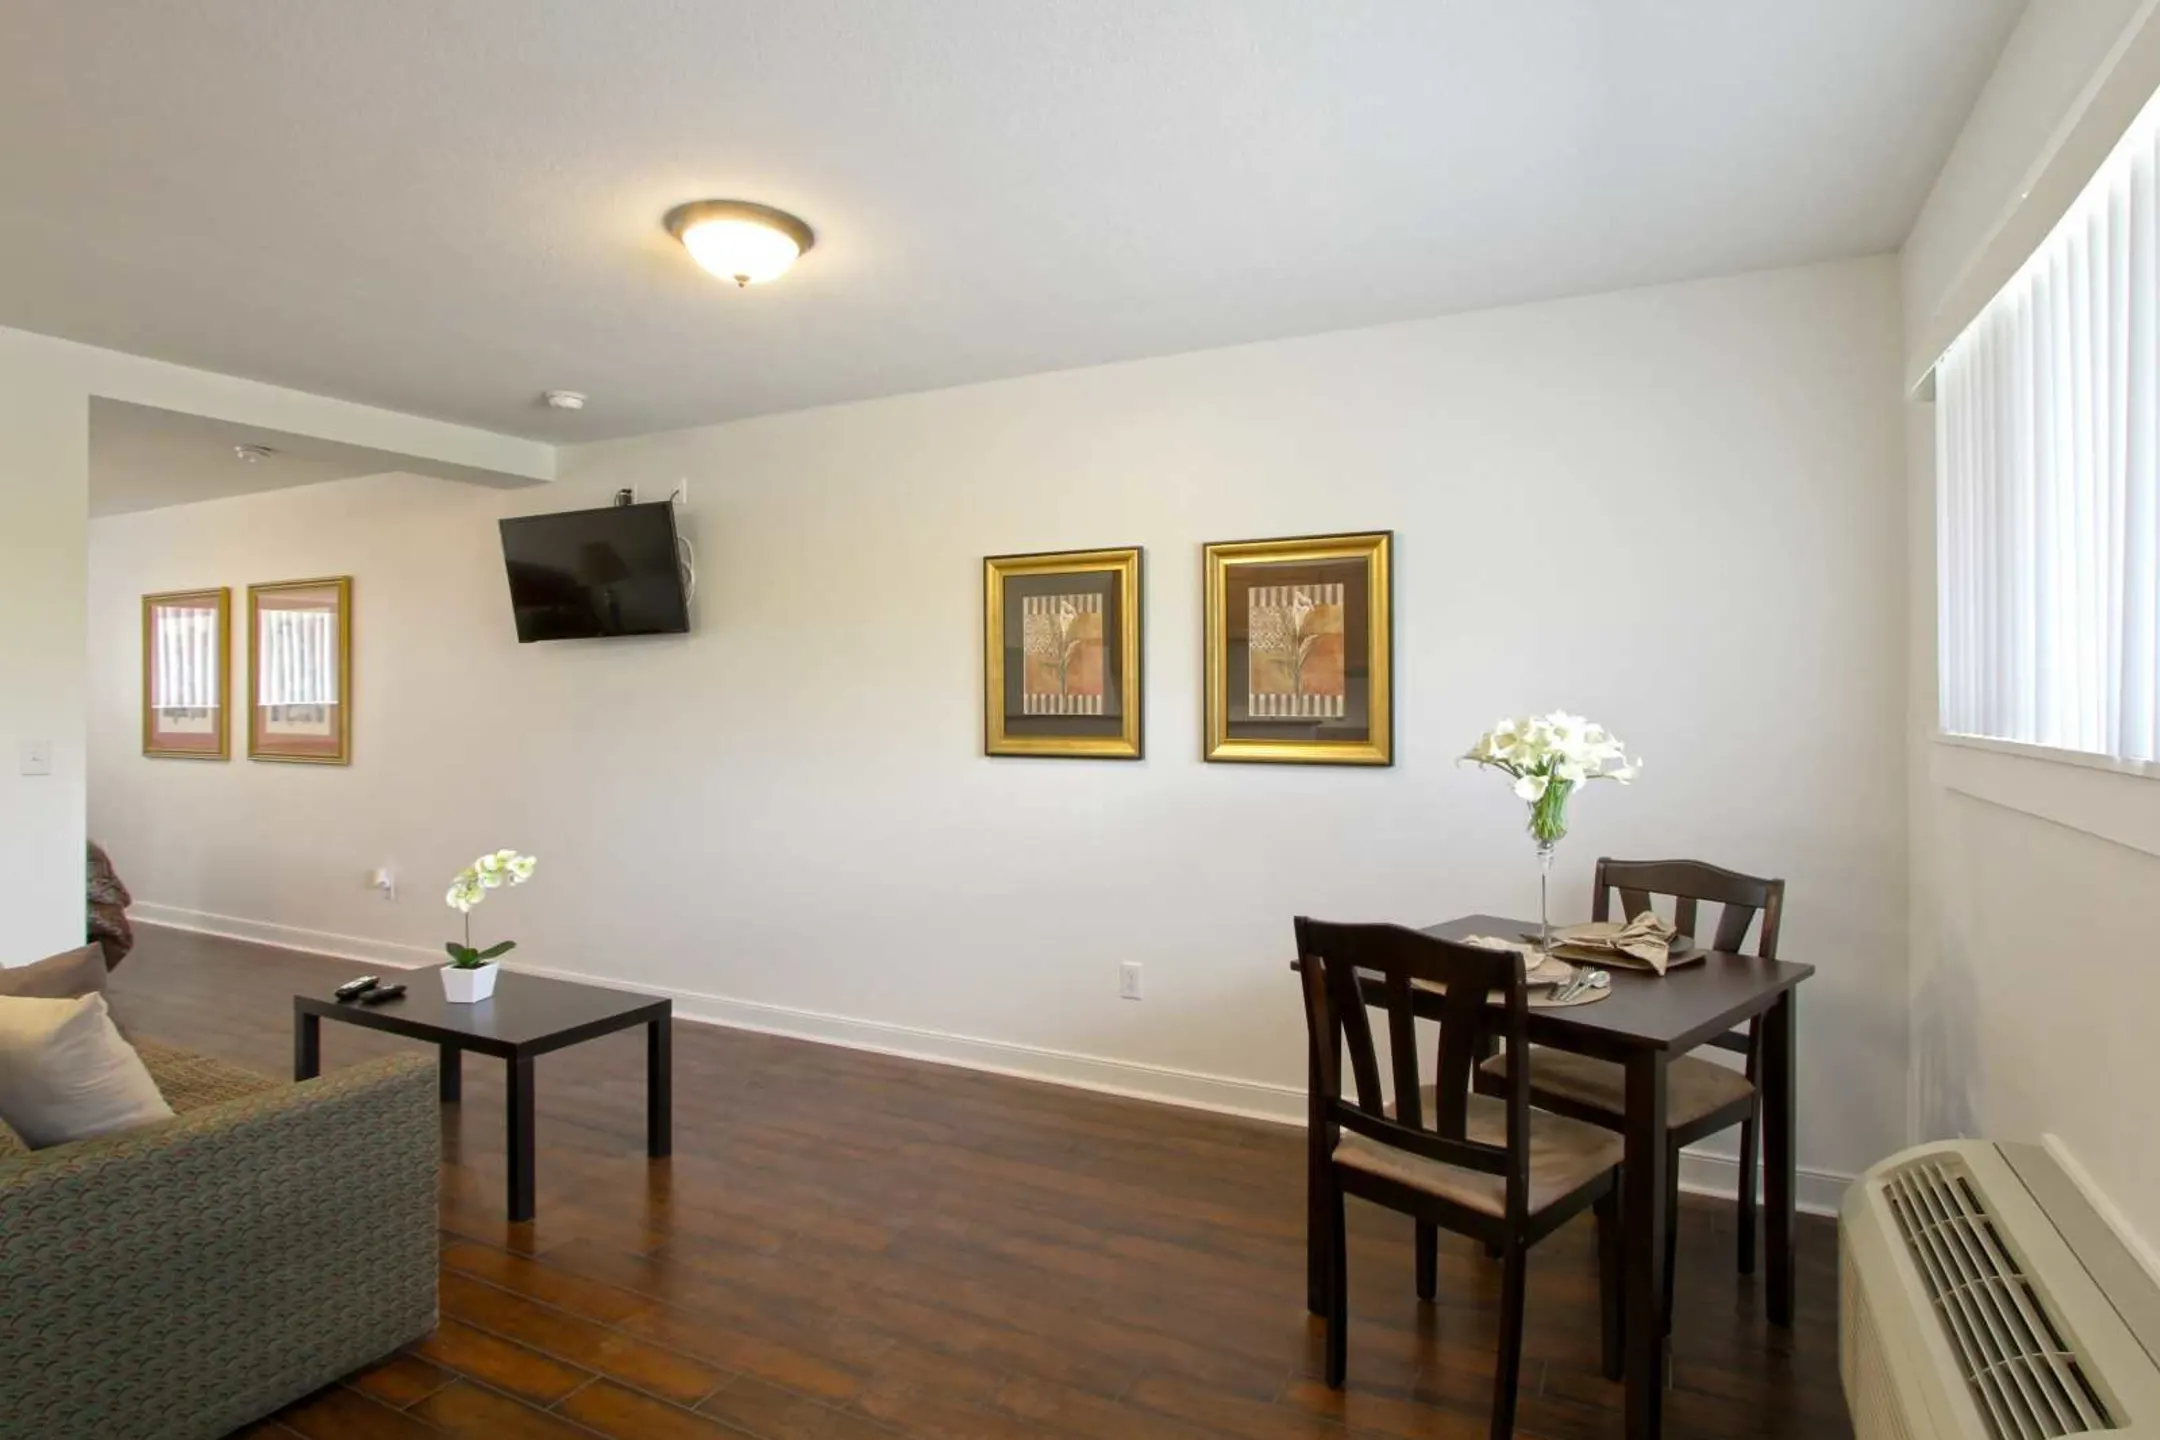 Dining Room - Woodworth Park Apartments - North Lima, OH